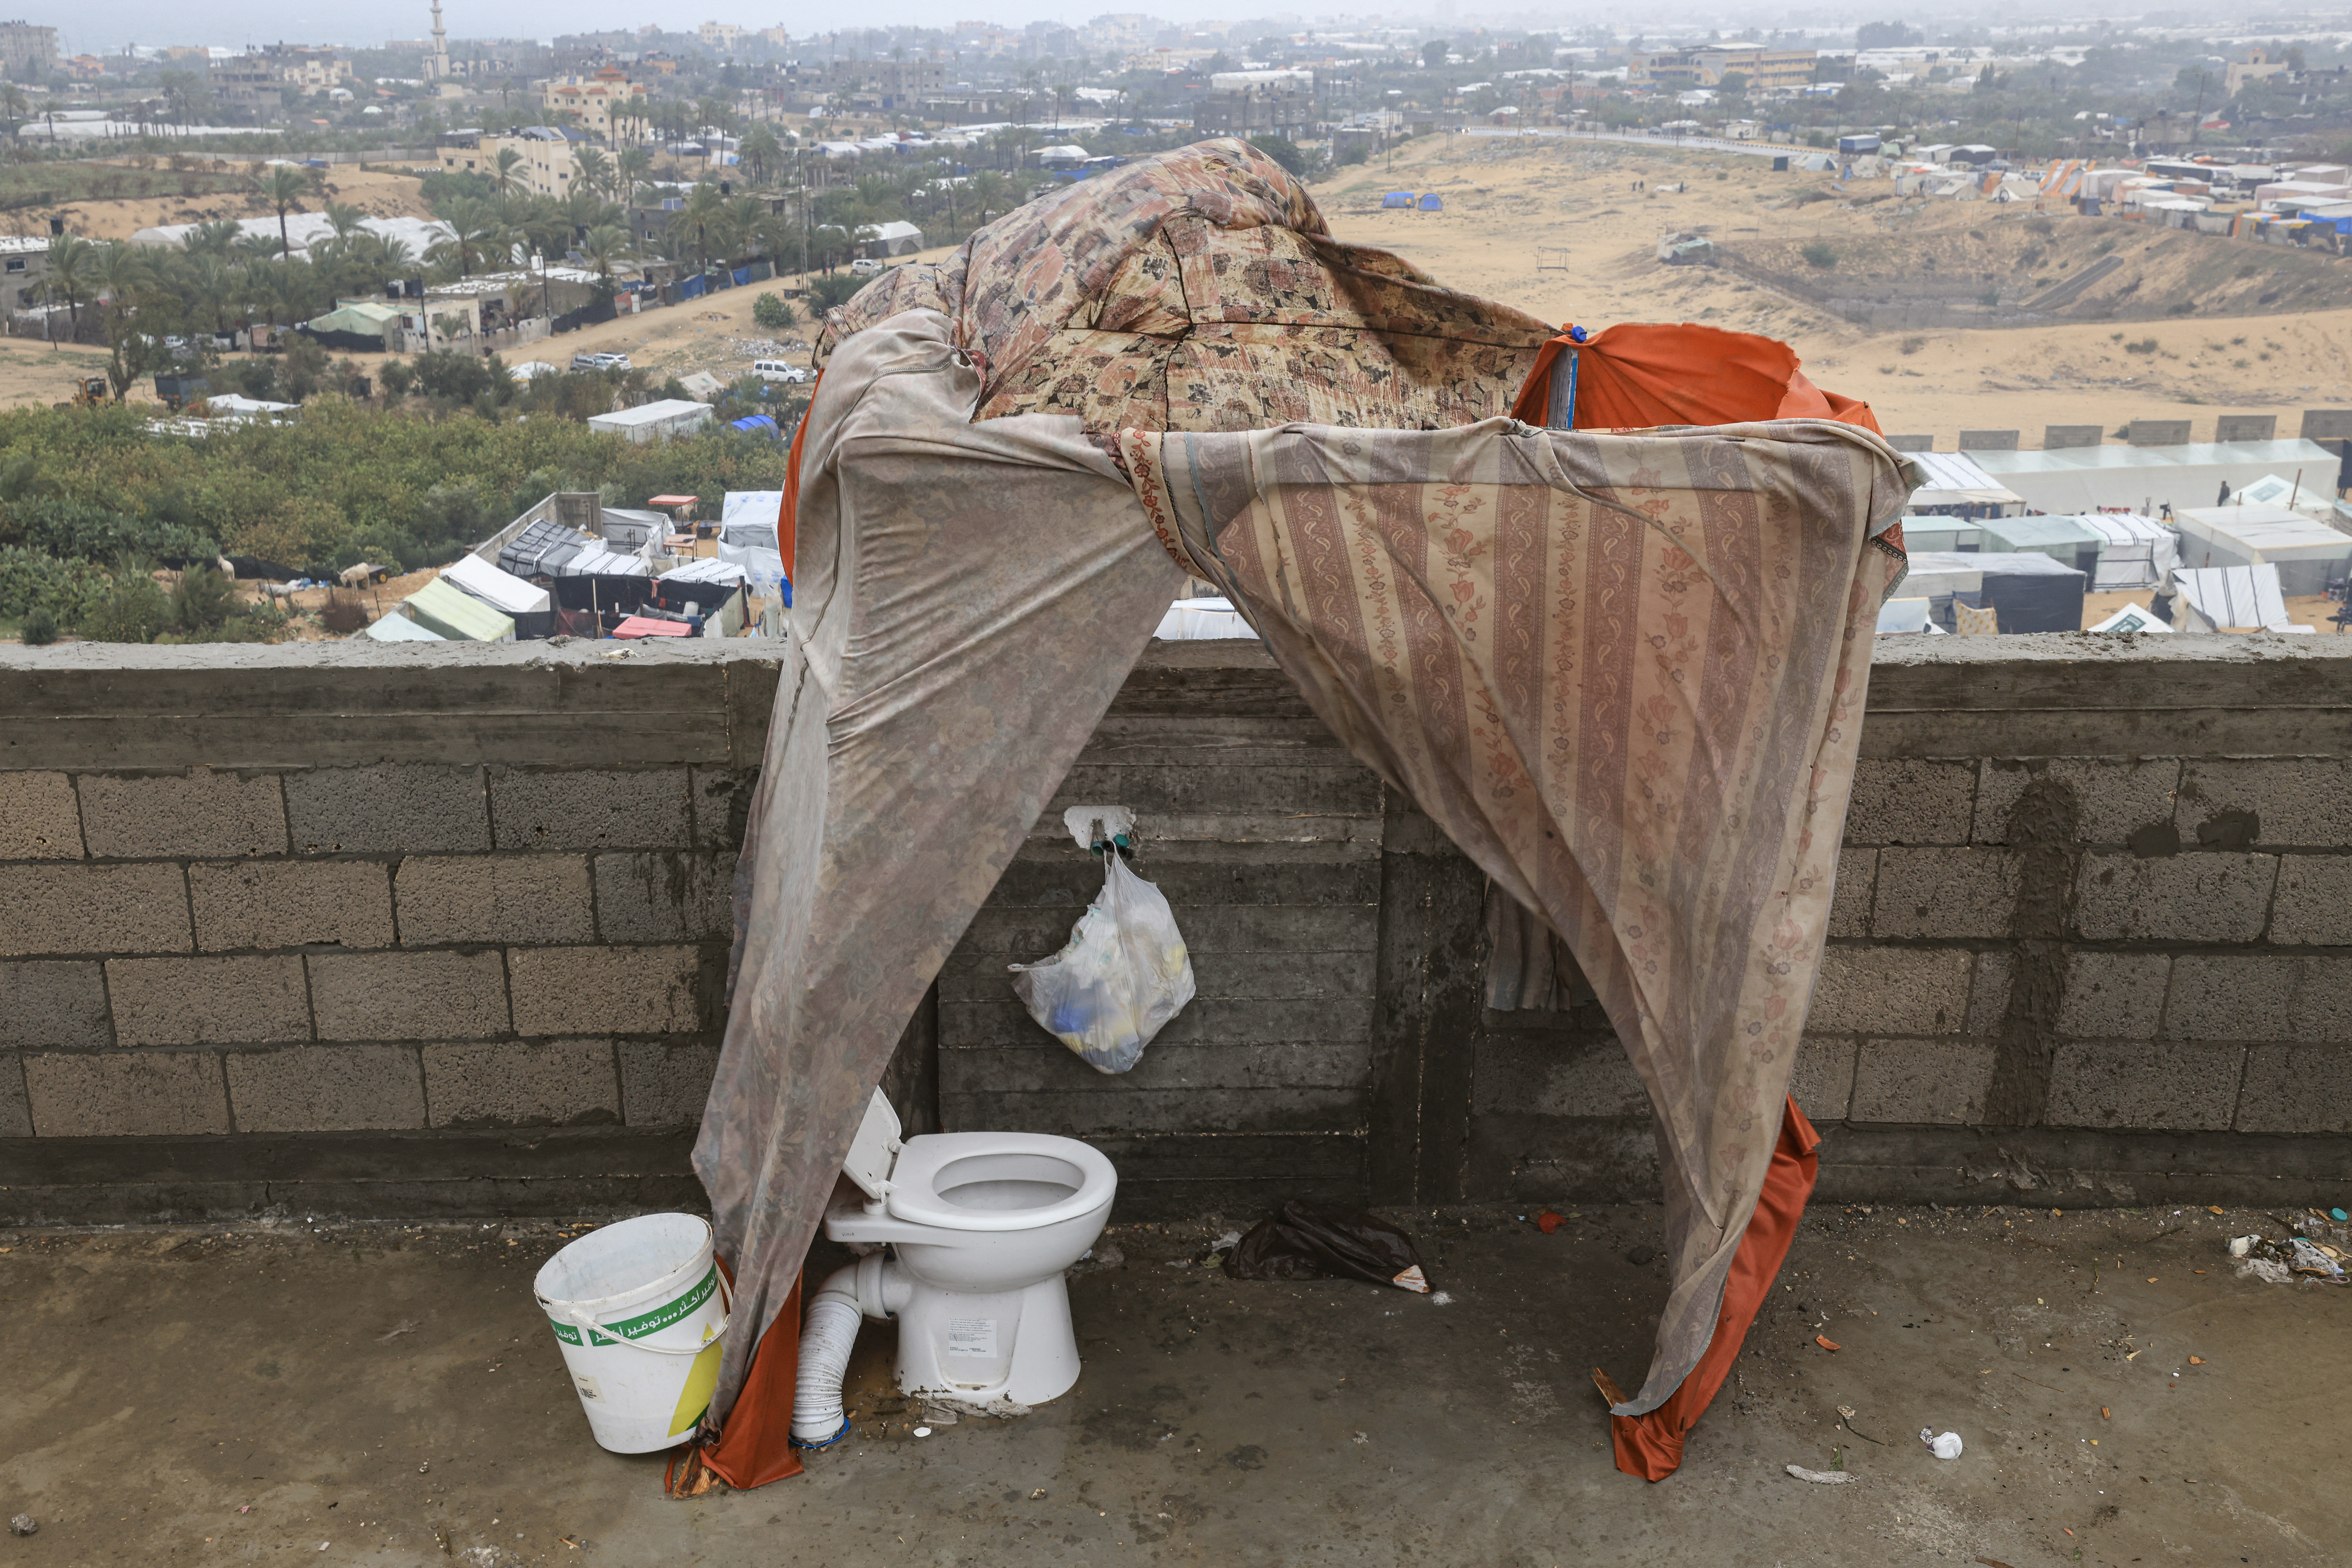 Makeshift toilets are pictured at a camp for displaced people in Rafah, in the southern Gaza Strip where most civilians have taken refuge.